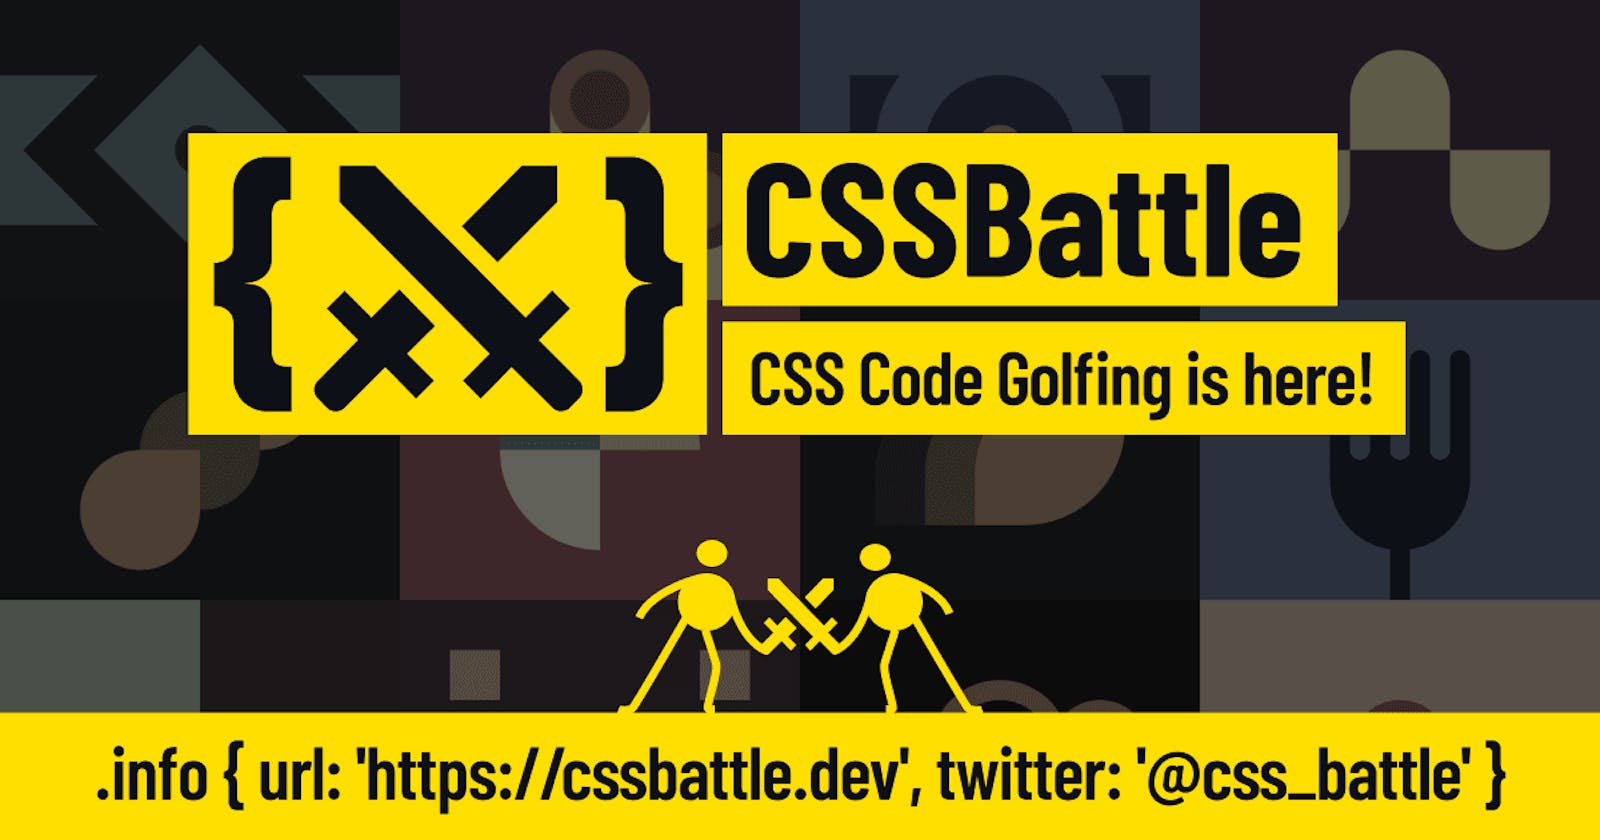 Get better at CSS by playing Games